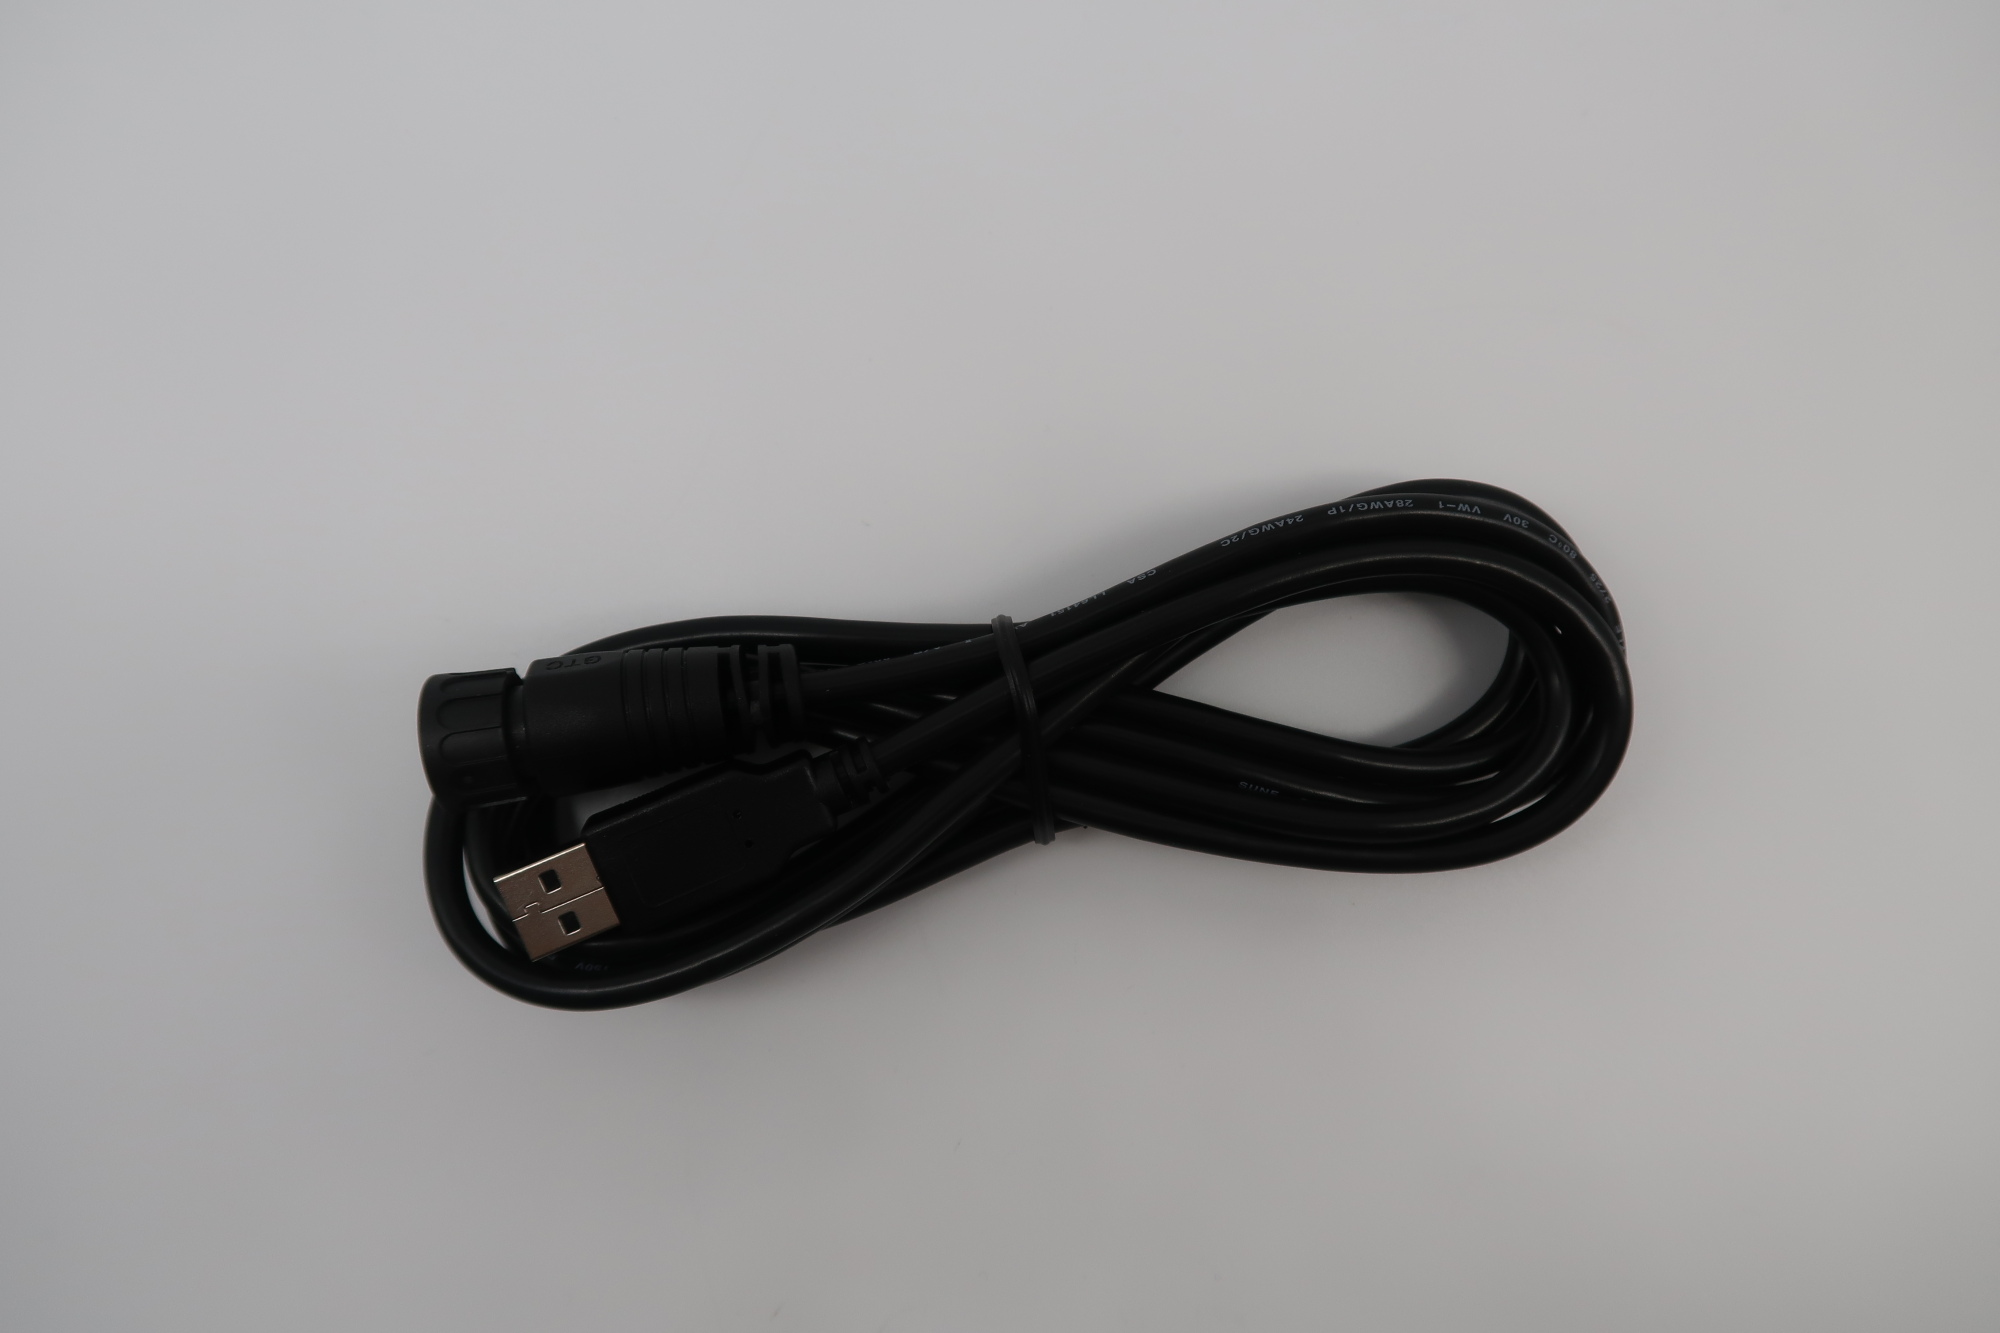 P14 PDM COMMS CABLE